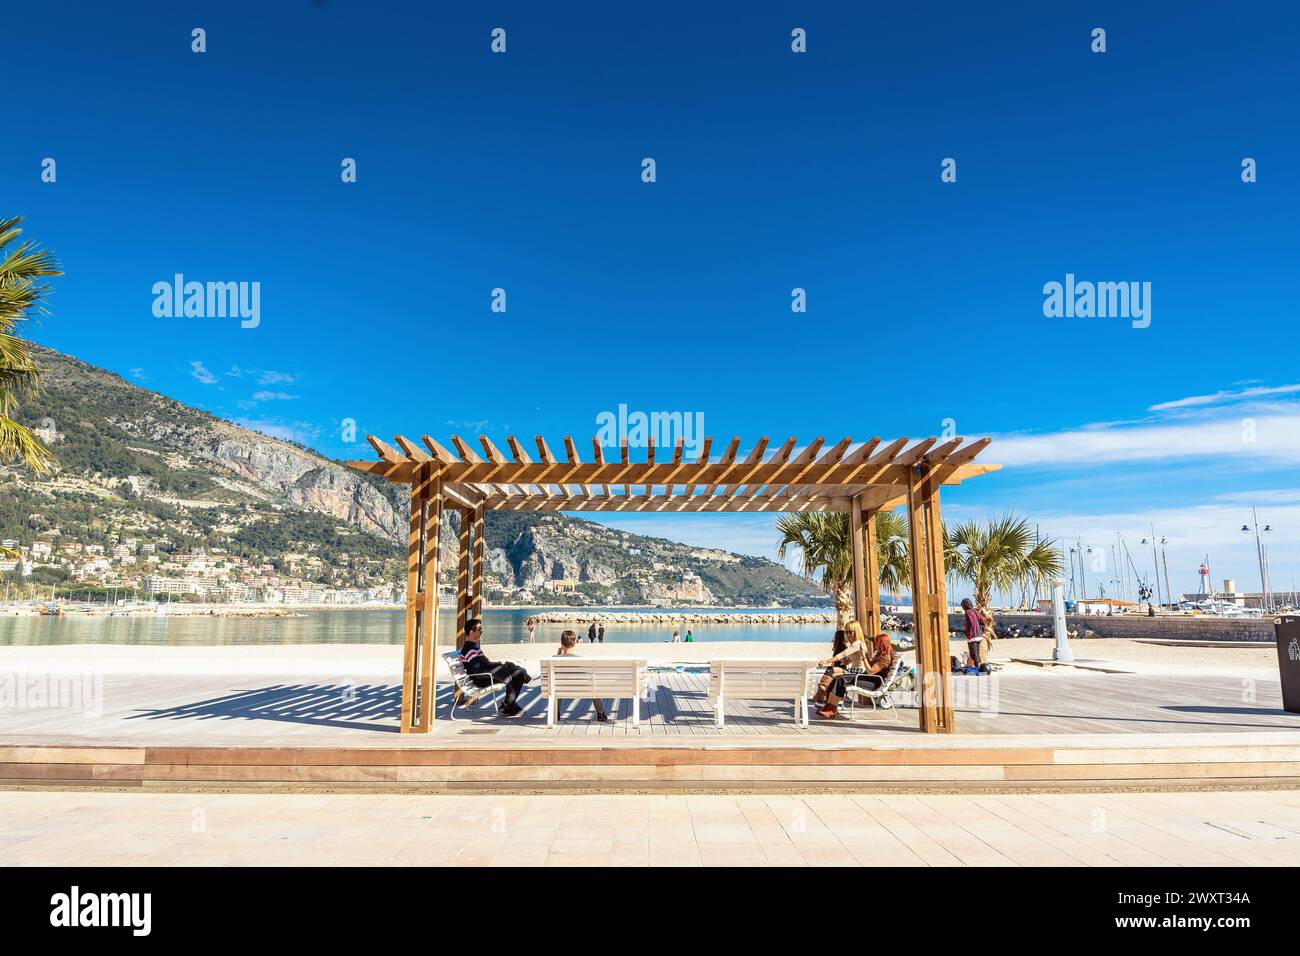 Menton, France - March 02, 2019: day view of Plage des Sablettes in Menton. It is located between the two ports along the Quai Bonaparte and the old t Stock Photo